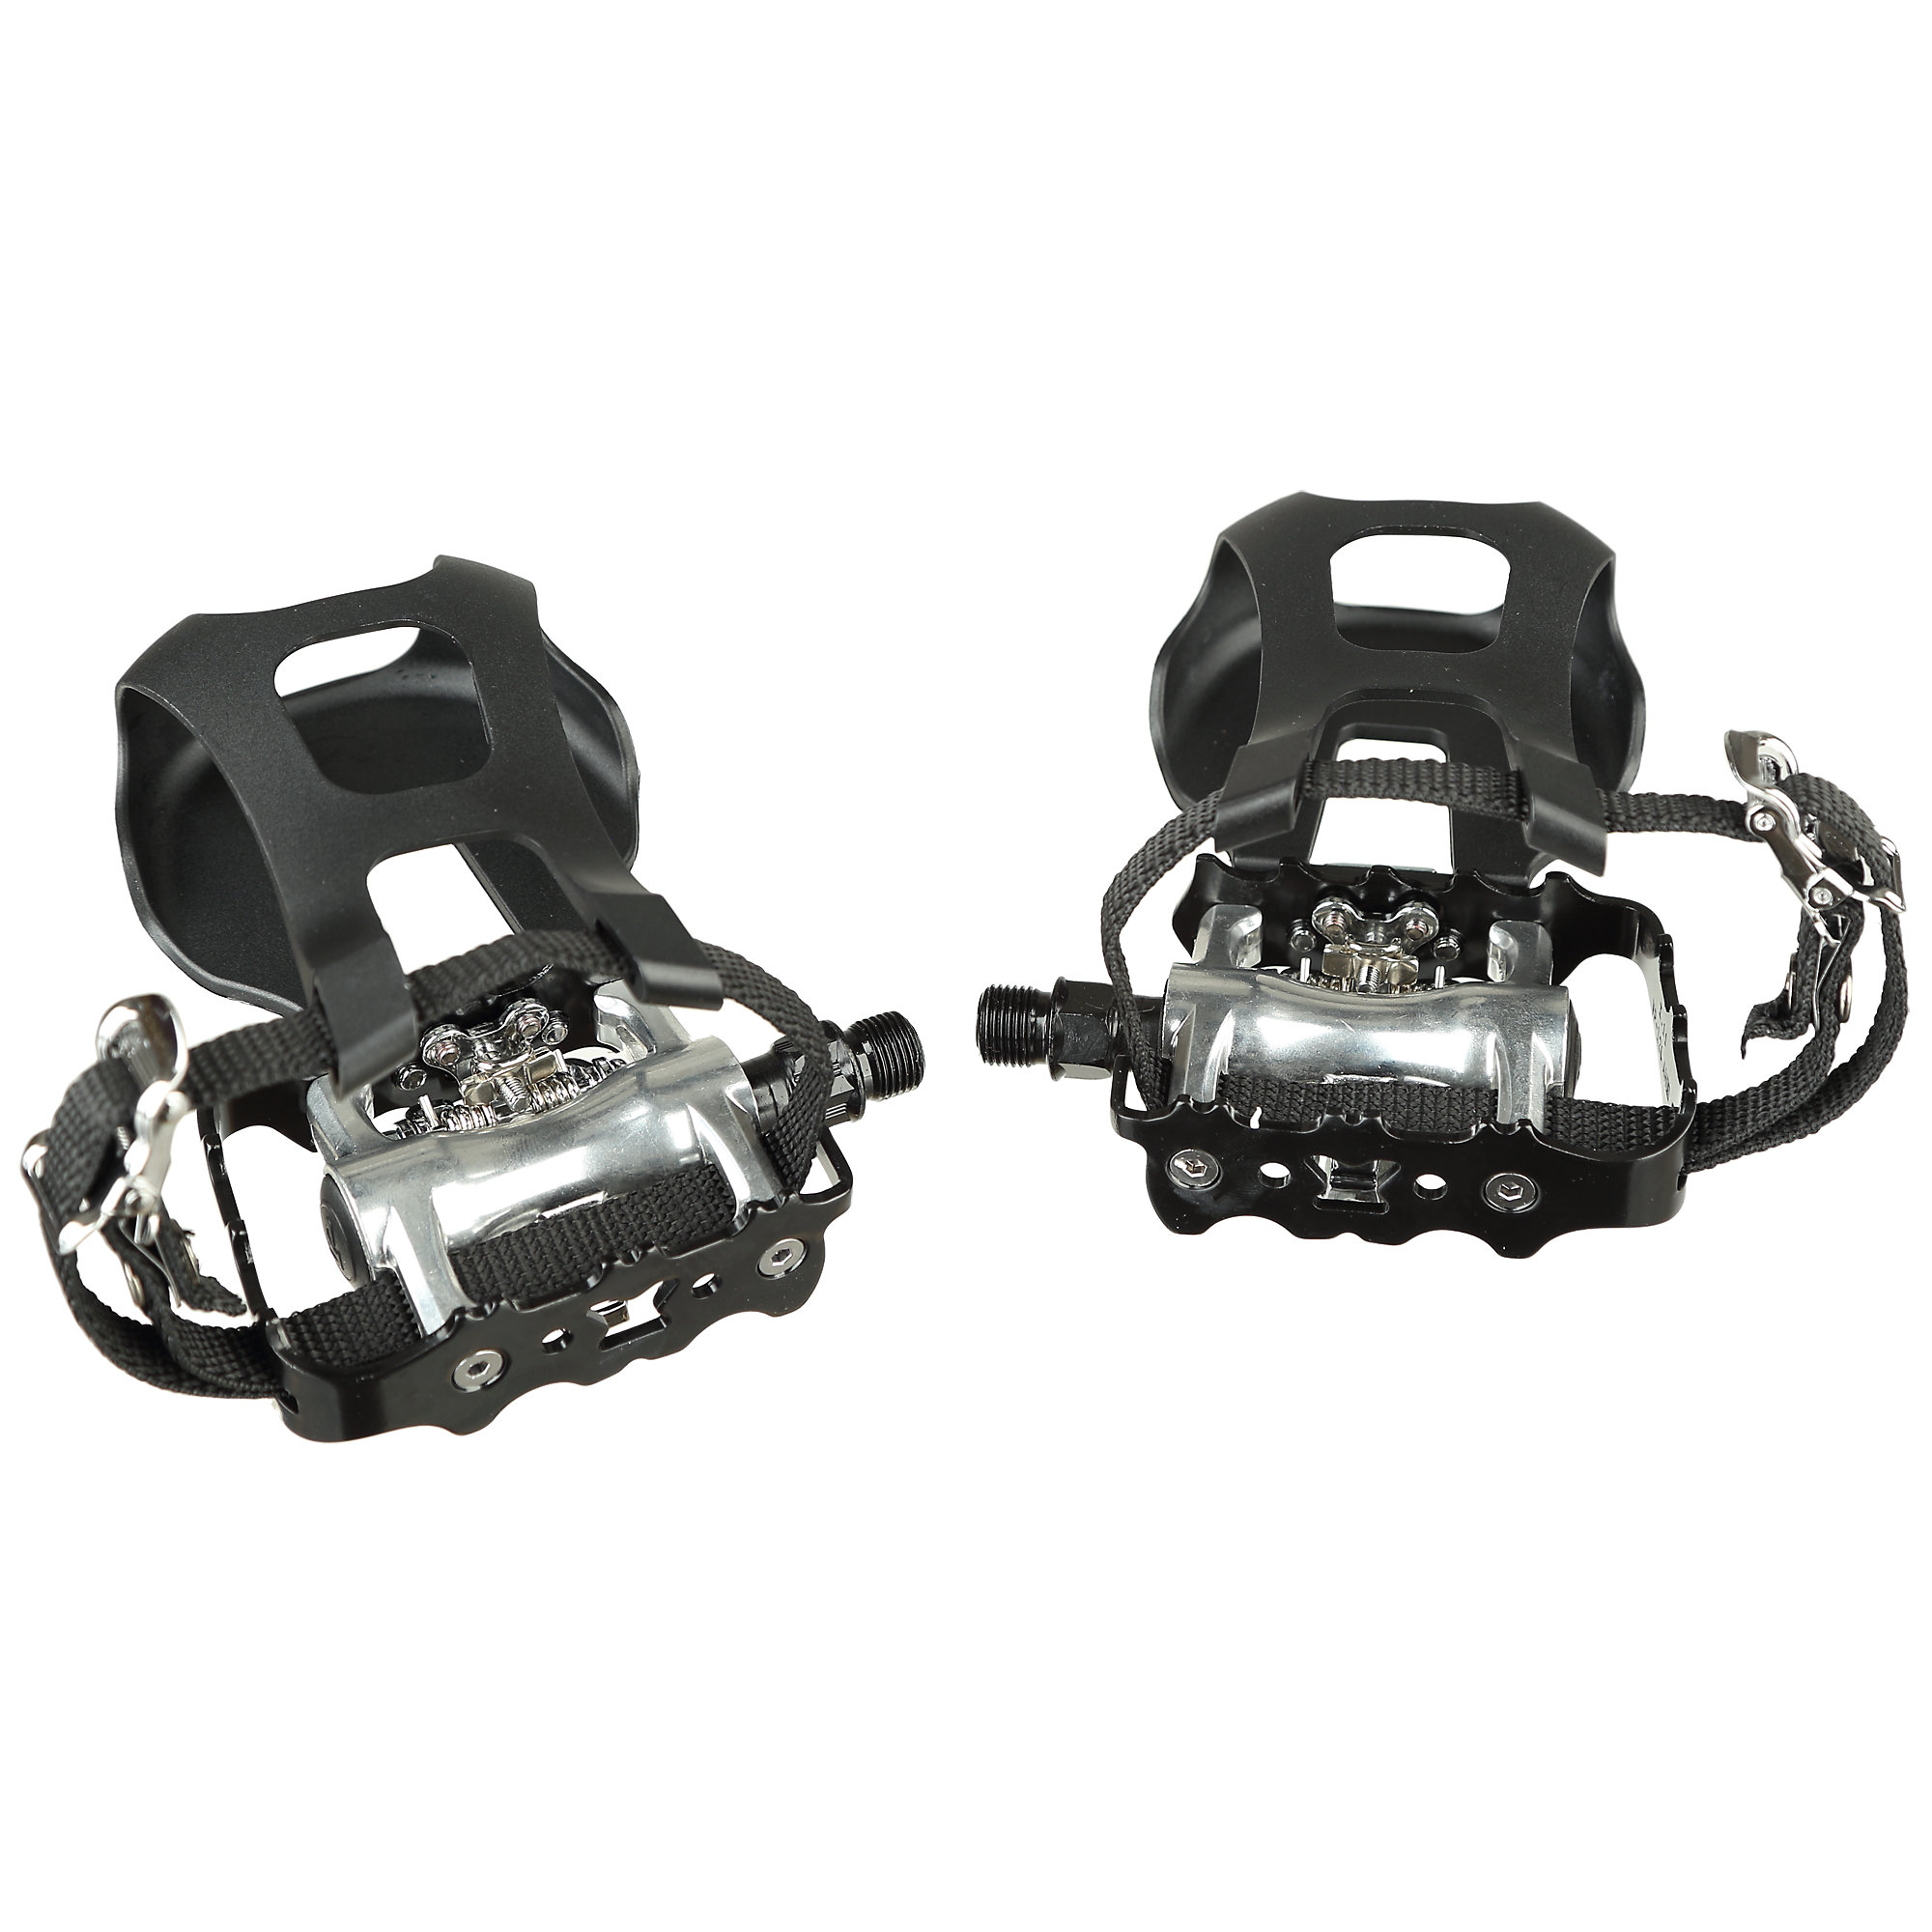 Bike Pedals, *SPD* Pedal Set with Toe Cages/Straps, 9/16", Threaded, Star Trac